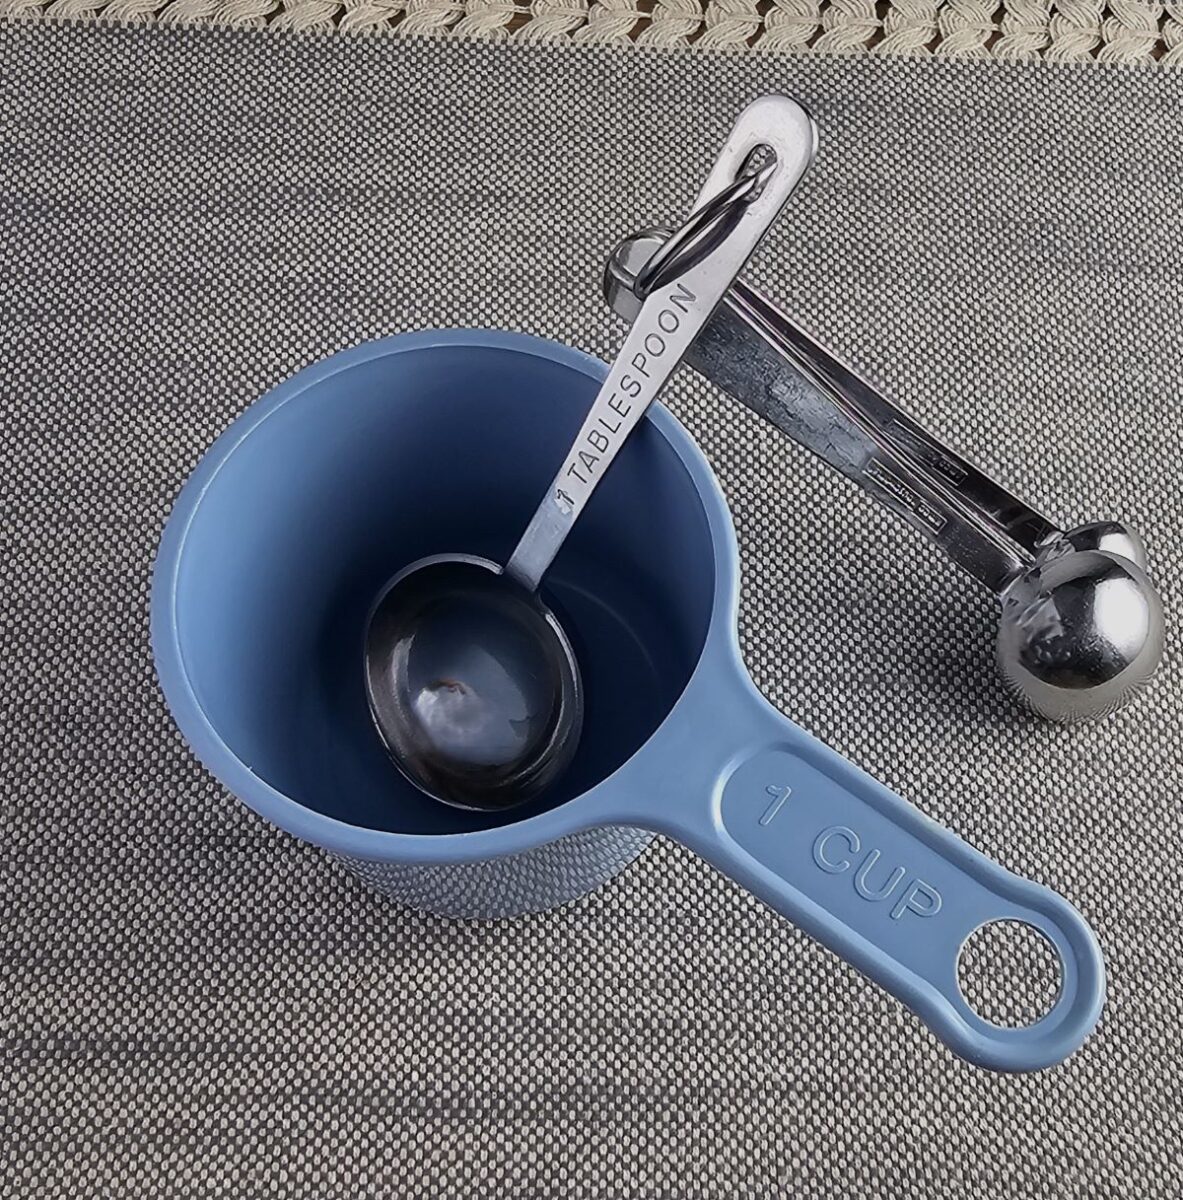 Tablespoon in a blue cup.